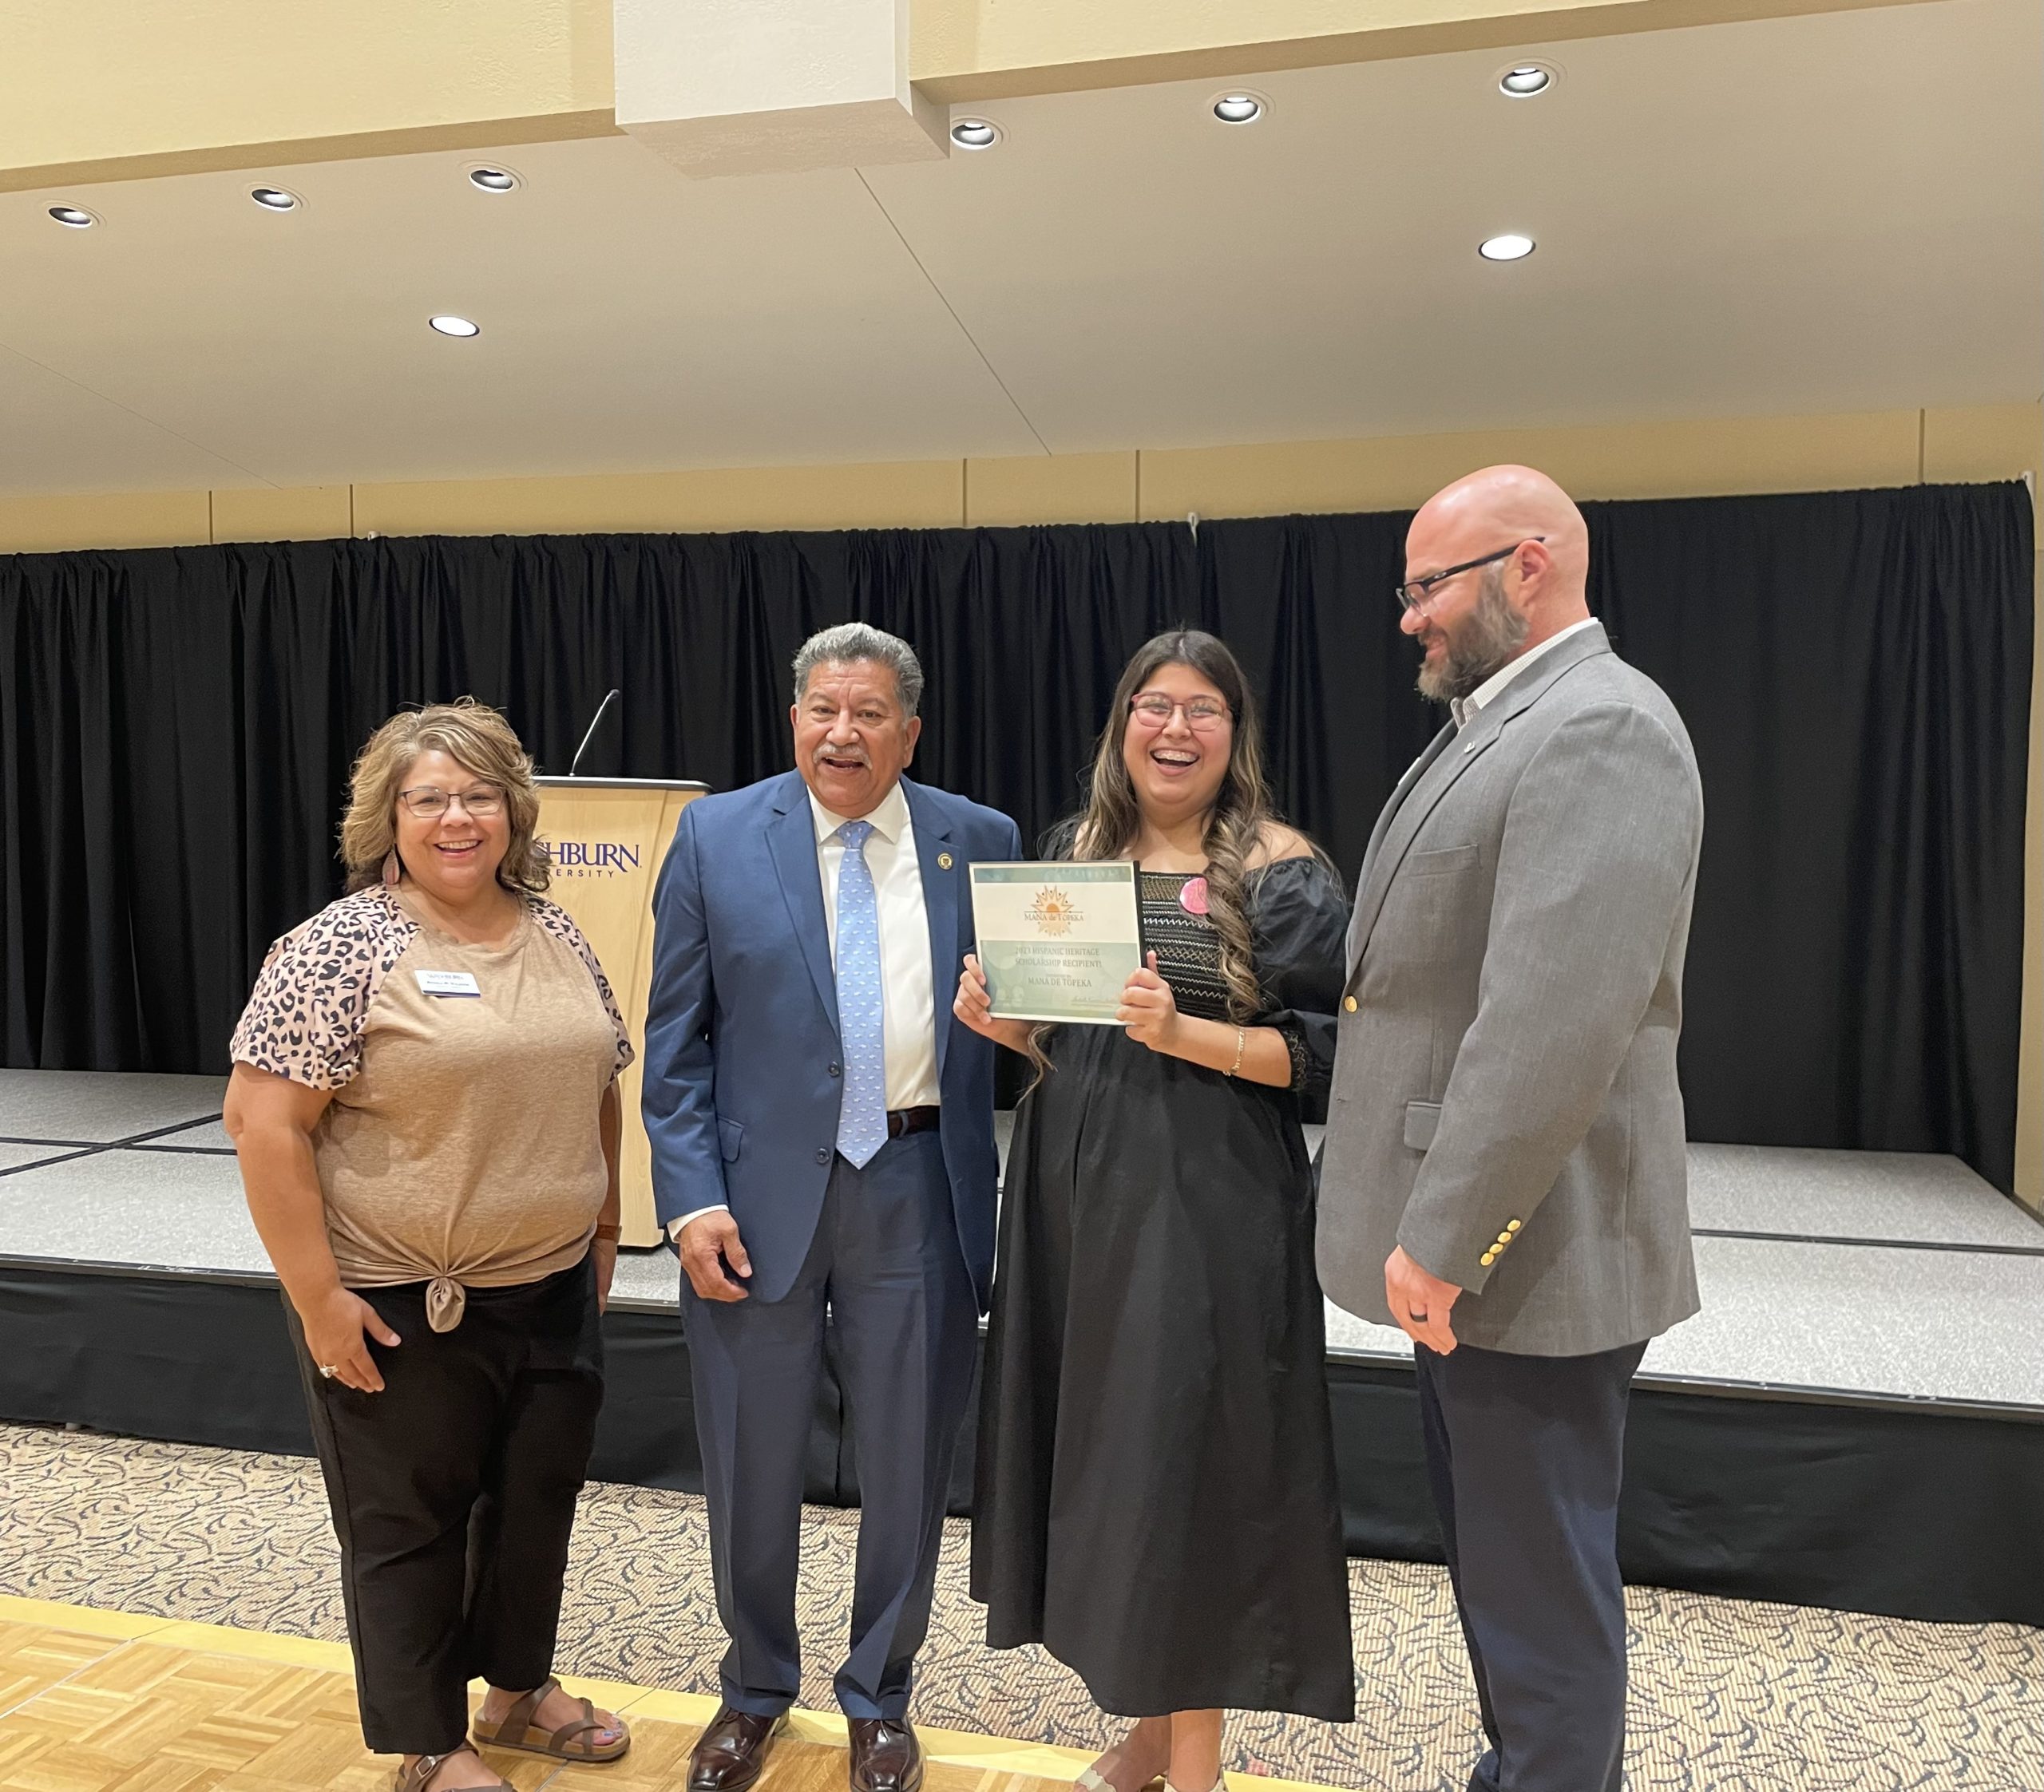 Mariet Delgado, junior finance and management major, receives a $500 scholarship as the Hispanic Heritage Month Banquet was coming to a close. 
The scholarship was provided by Mana De Topeka, local chapter of MANA, a national Latina organization.

From left: Angela Valdivia, Career Services assistant director, Michael Padilla, Topeka mayor, Delgado and Eric Grospitch, vice president of Student Life.